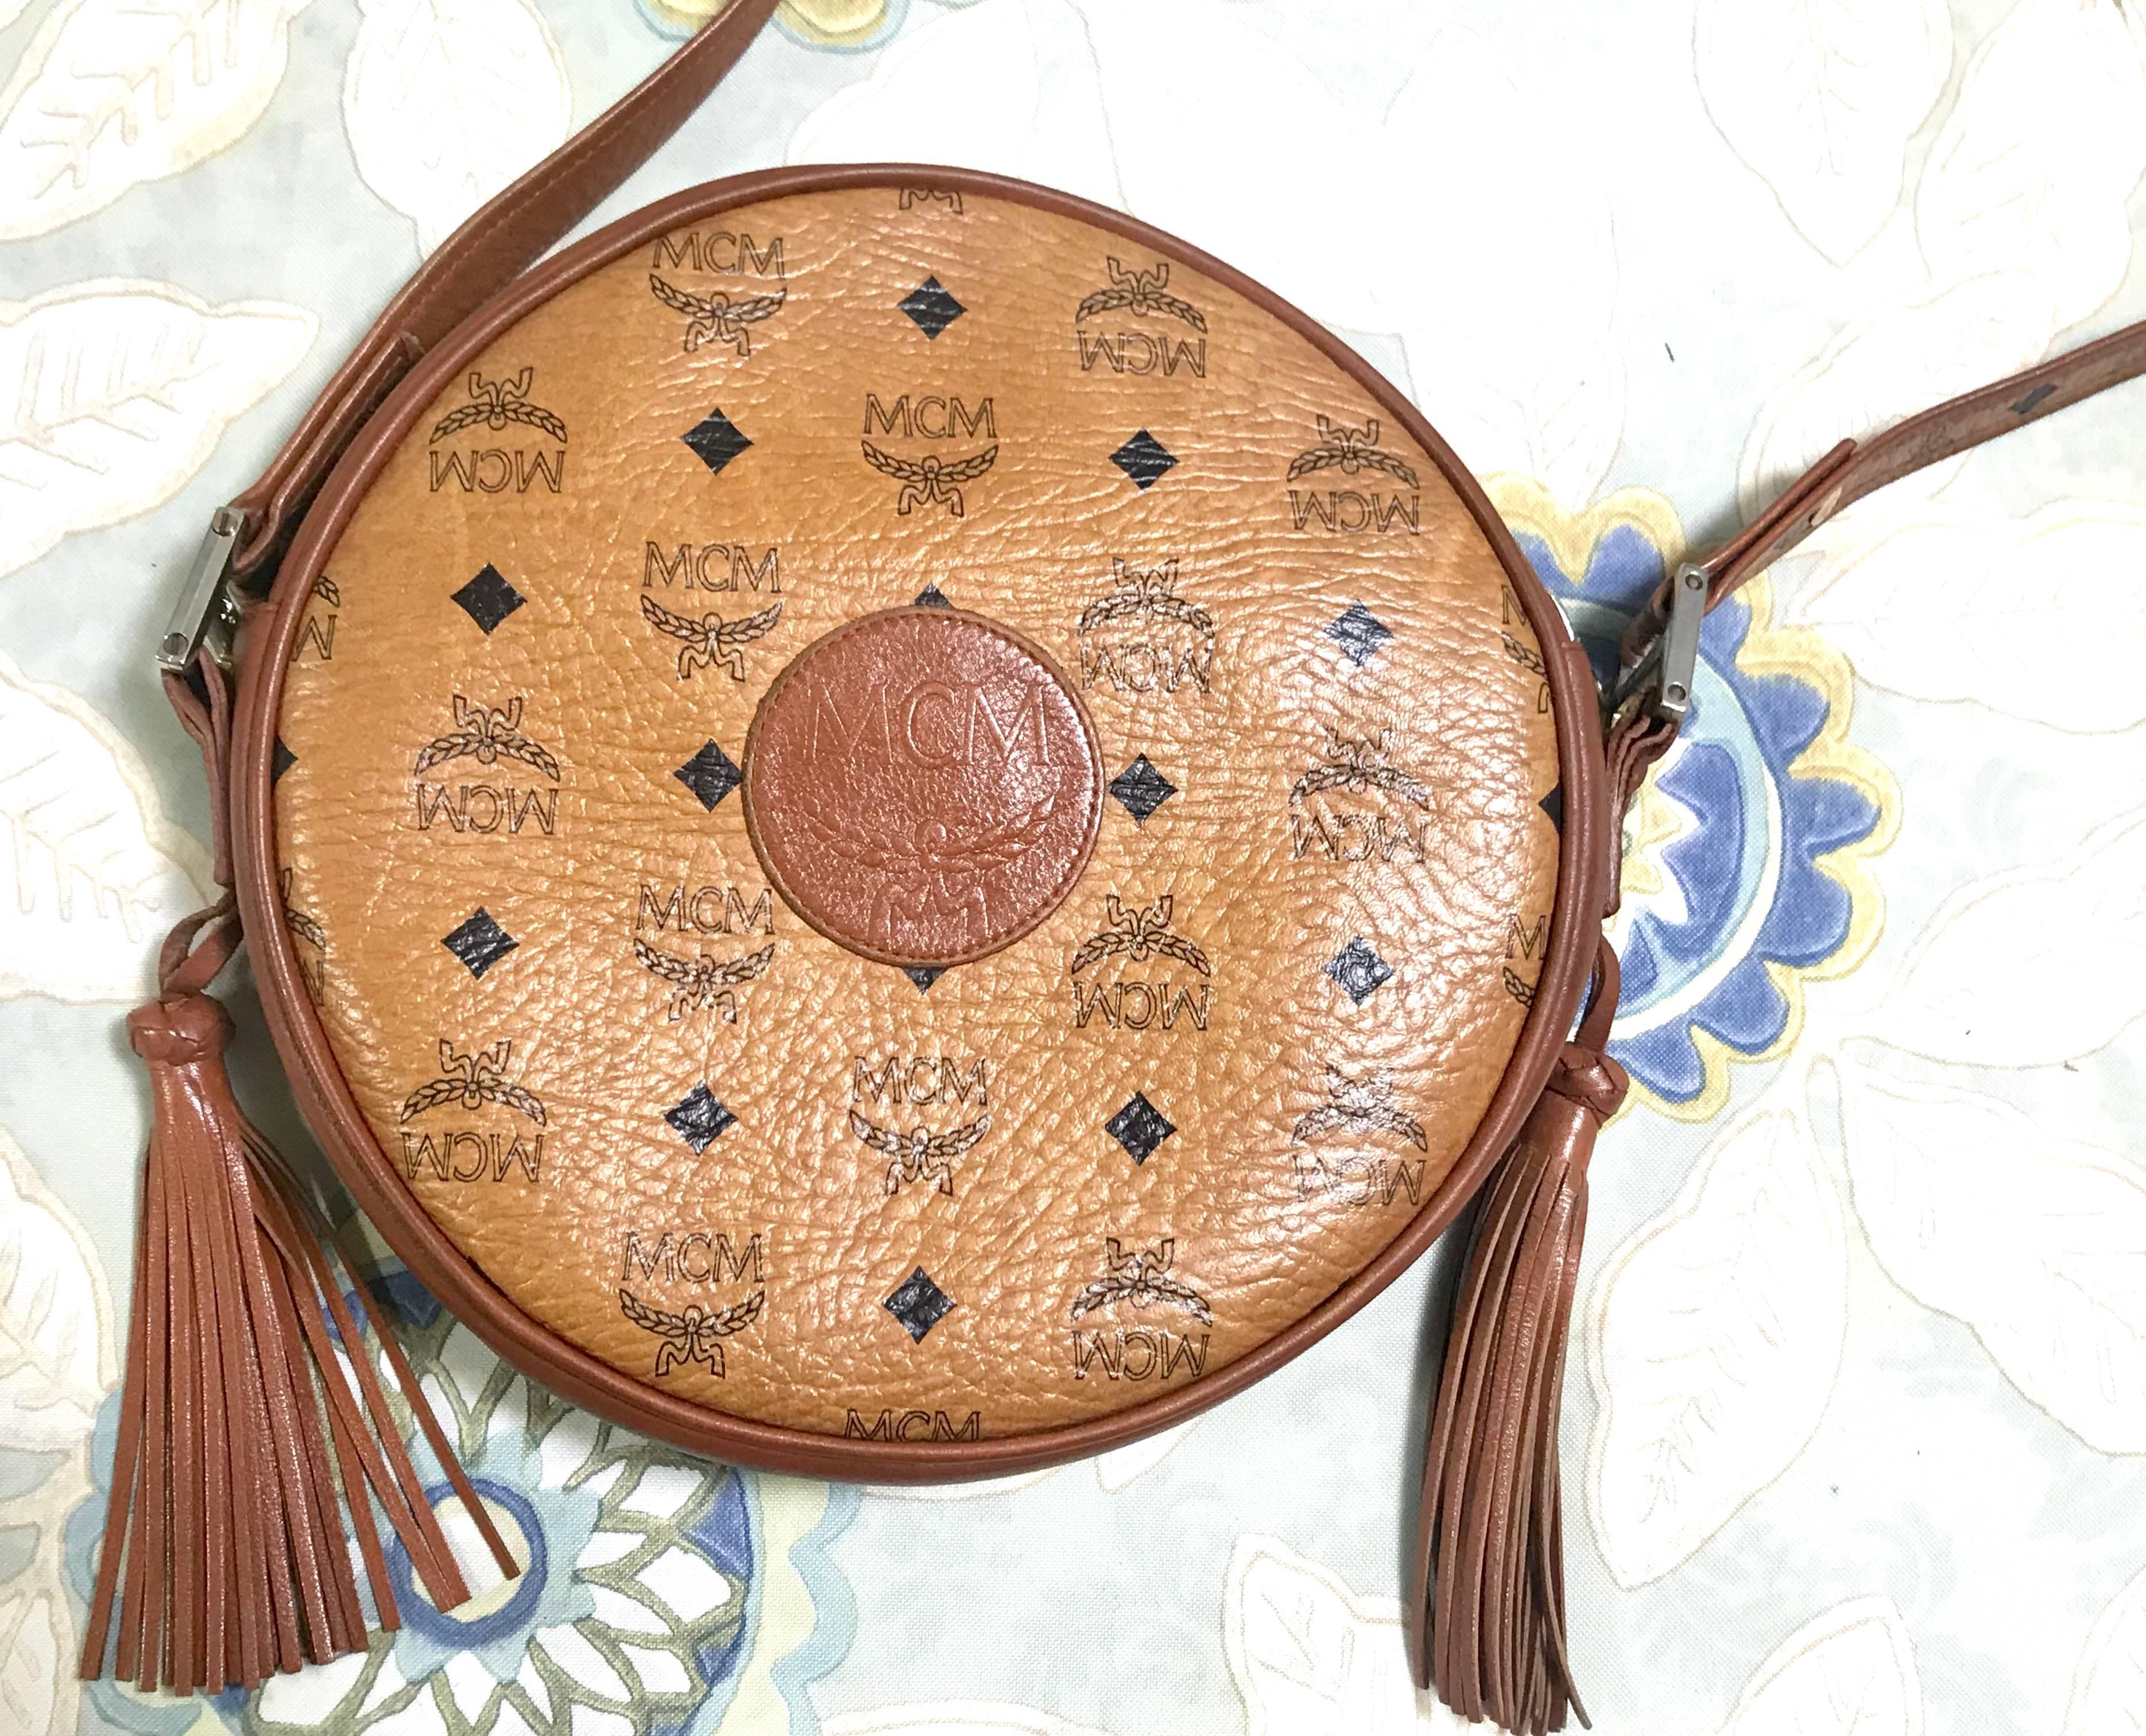 1990. Vintage MCM brown monogram round Suzy Wong shoulder bag with brown leather trimmings. Designed by Michael Cromer. Masterpiece. Unisex use.

MCM has been back in the fashion trend again!!
Now it's considered to be one of the must-have designer